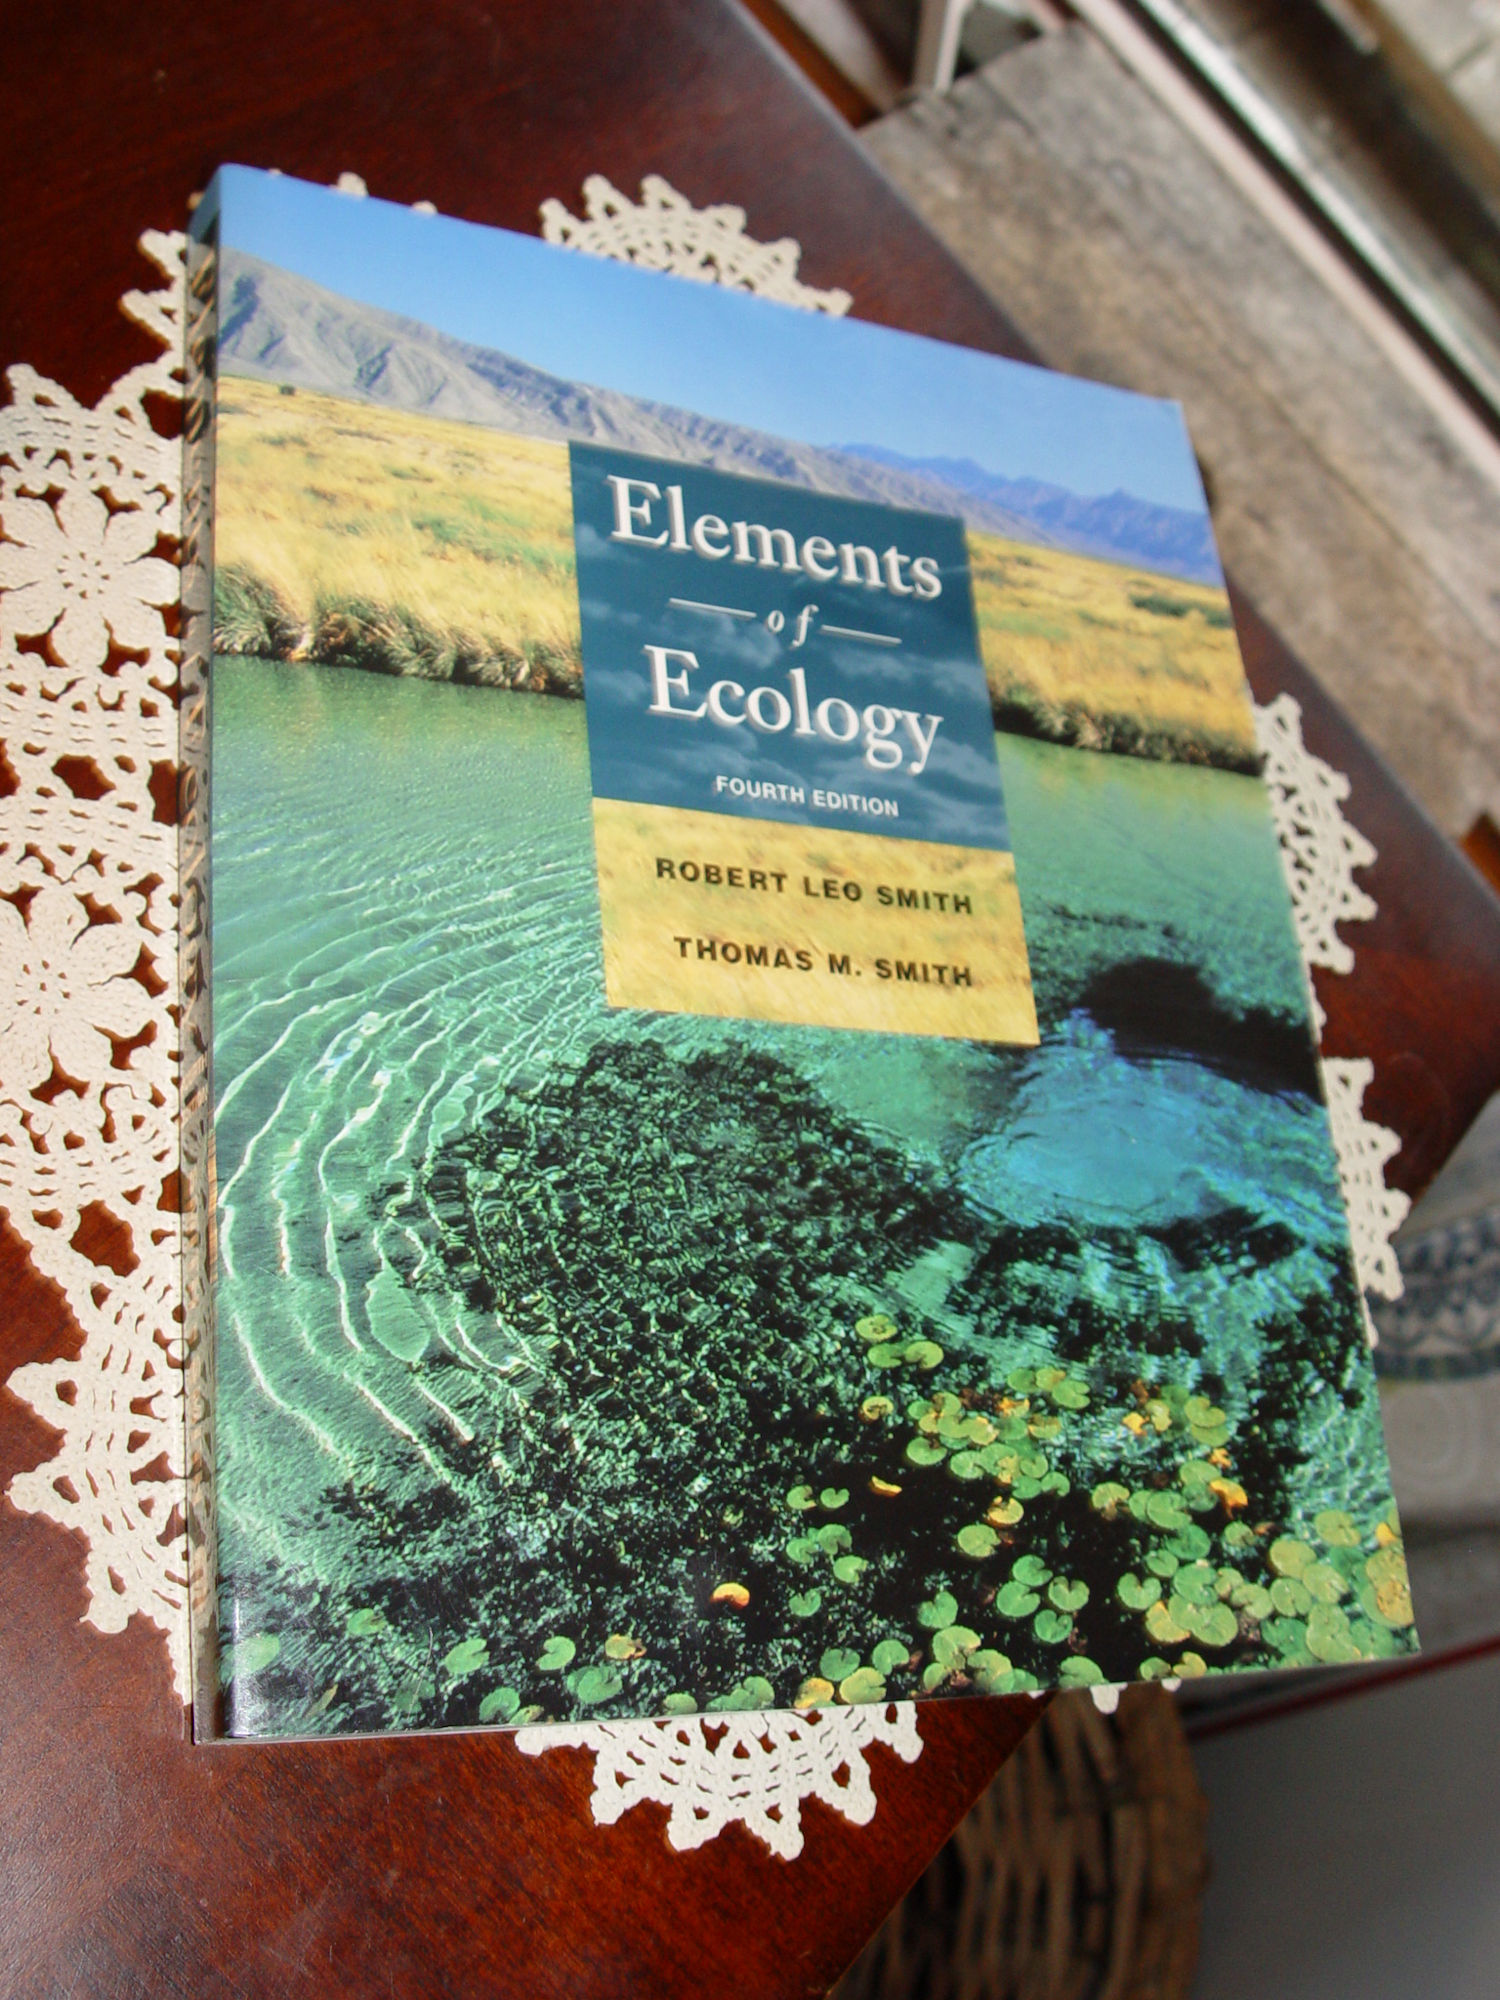 Elements of Ecology 4th Edition 1998 by
                        Robert Leo Smith